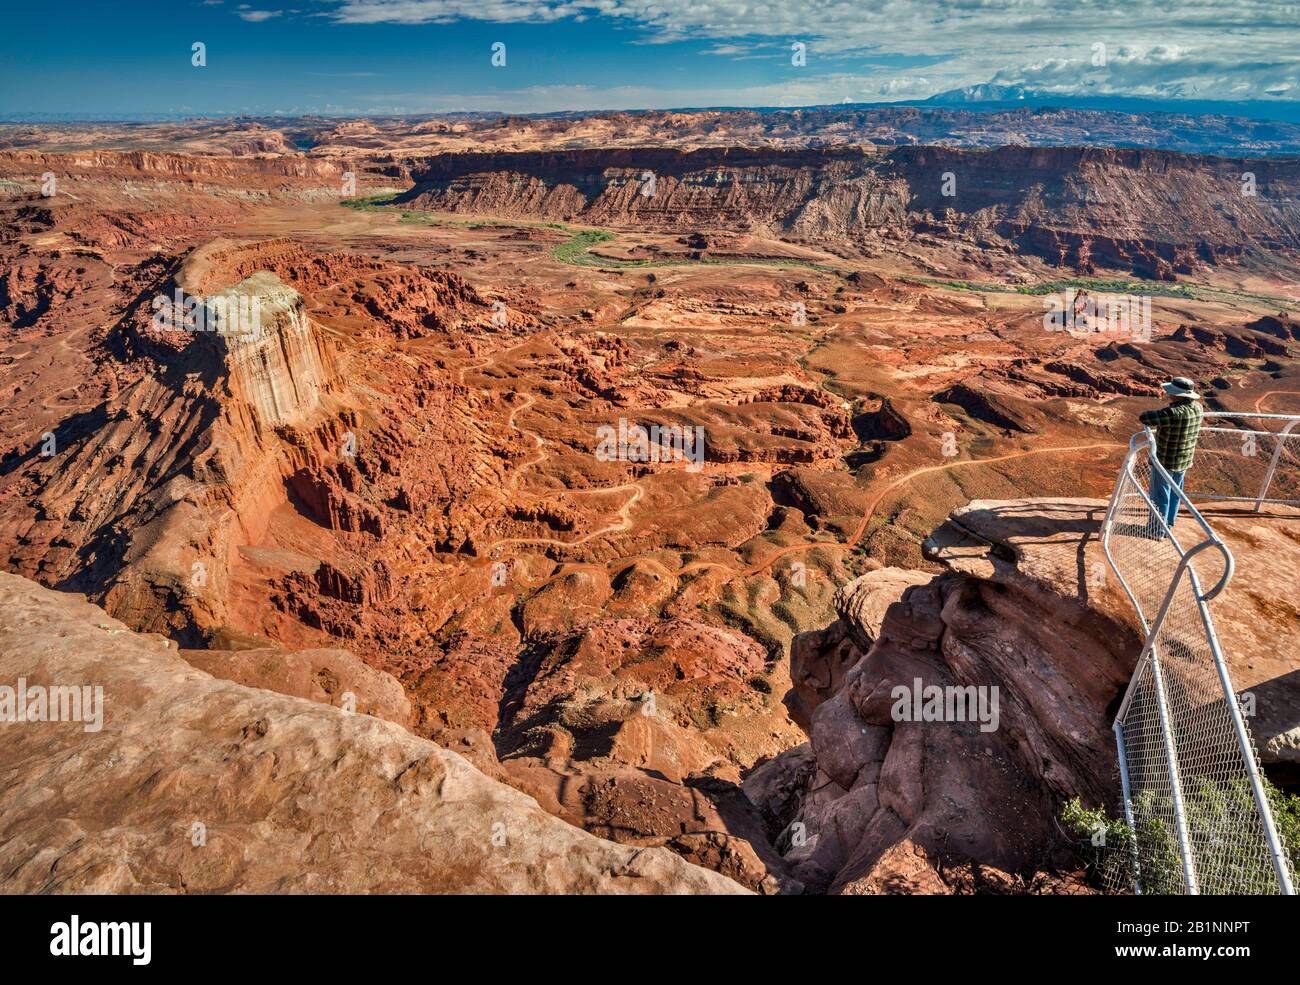 Cane Creek Anticline, view from Anticline Overlook, Colorado River in far distance, Canyon Rims Recreation Area, near Moab, Utah, USA Stock Photo